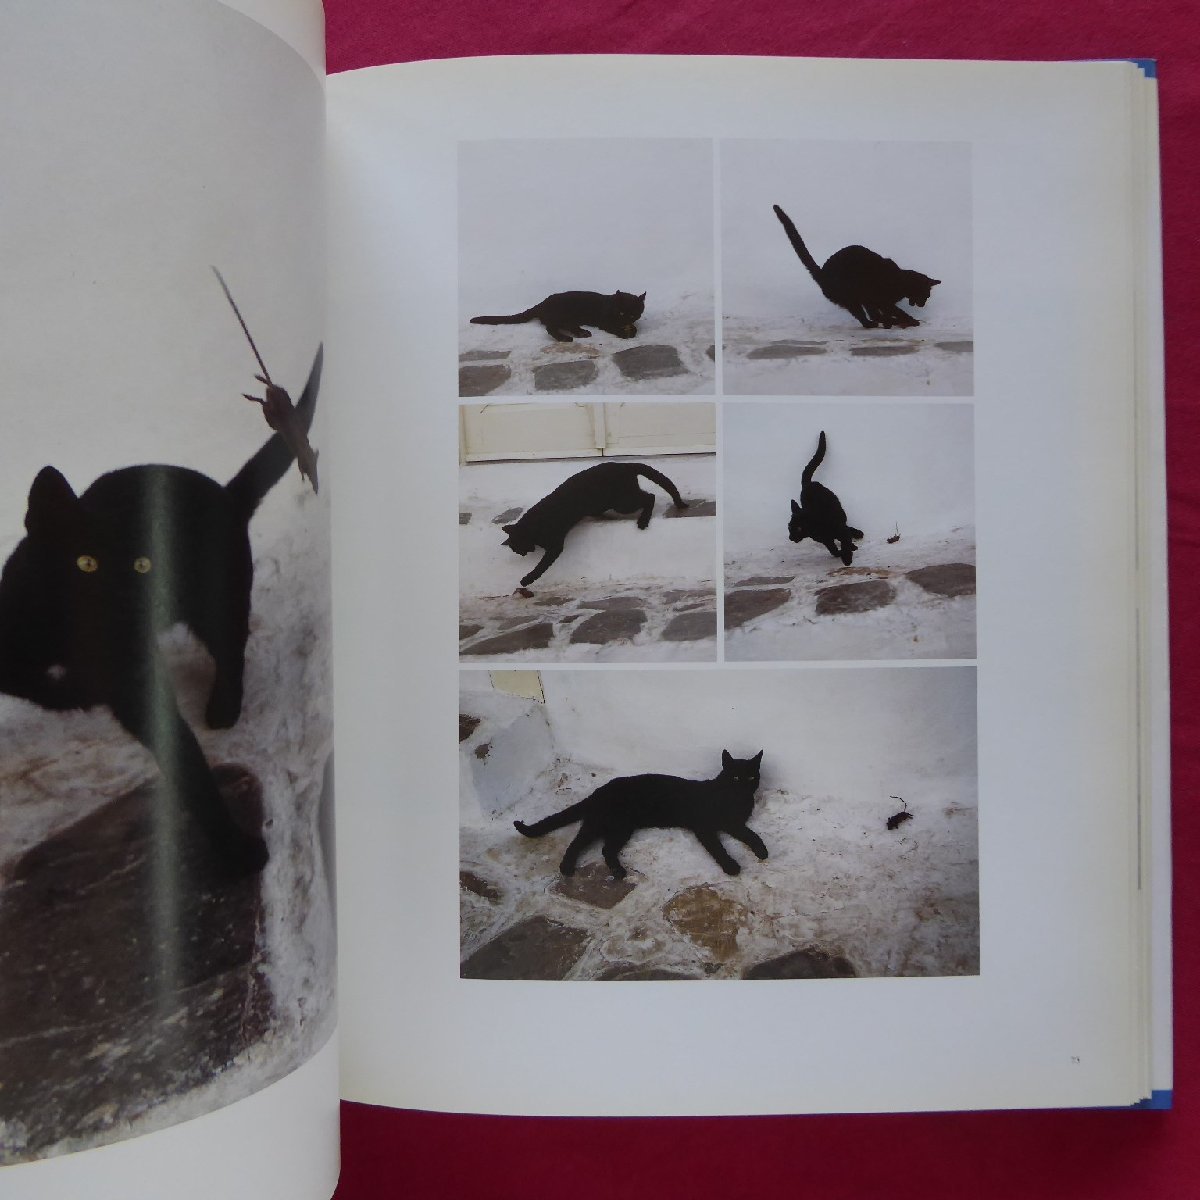 u2/ foreign book photoalbum [ Greece various island. cat ..:Cats of the Greek Islands/1993 year *Thames and Hudson]../ black cat 